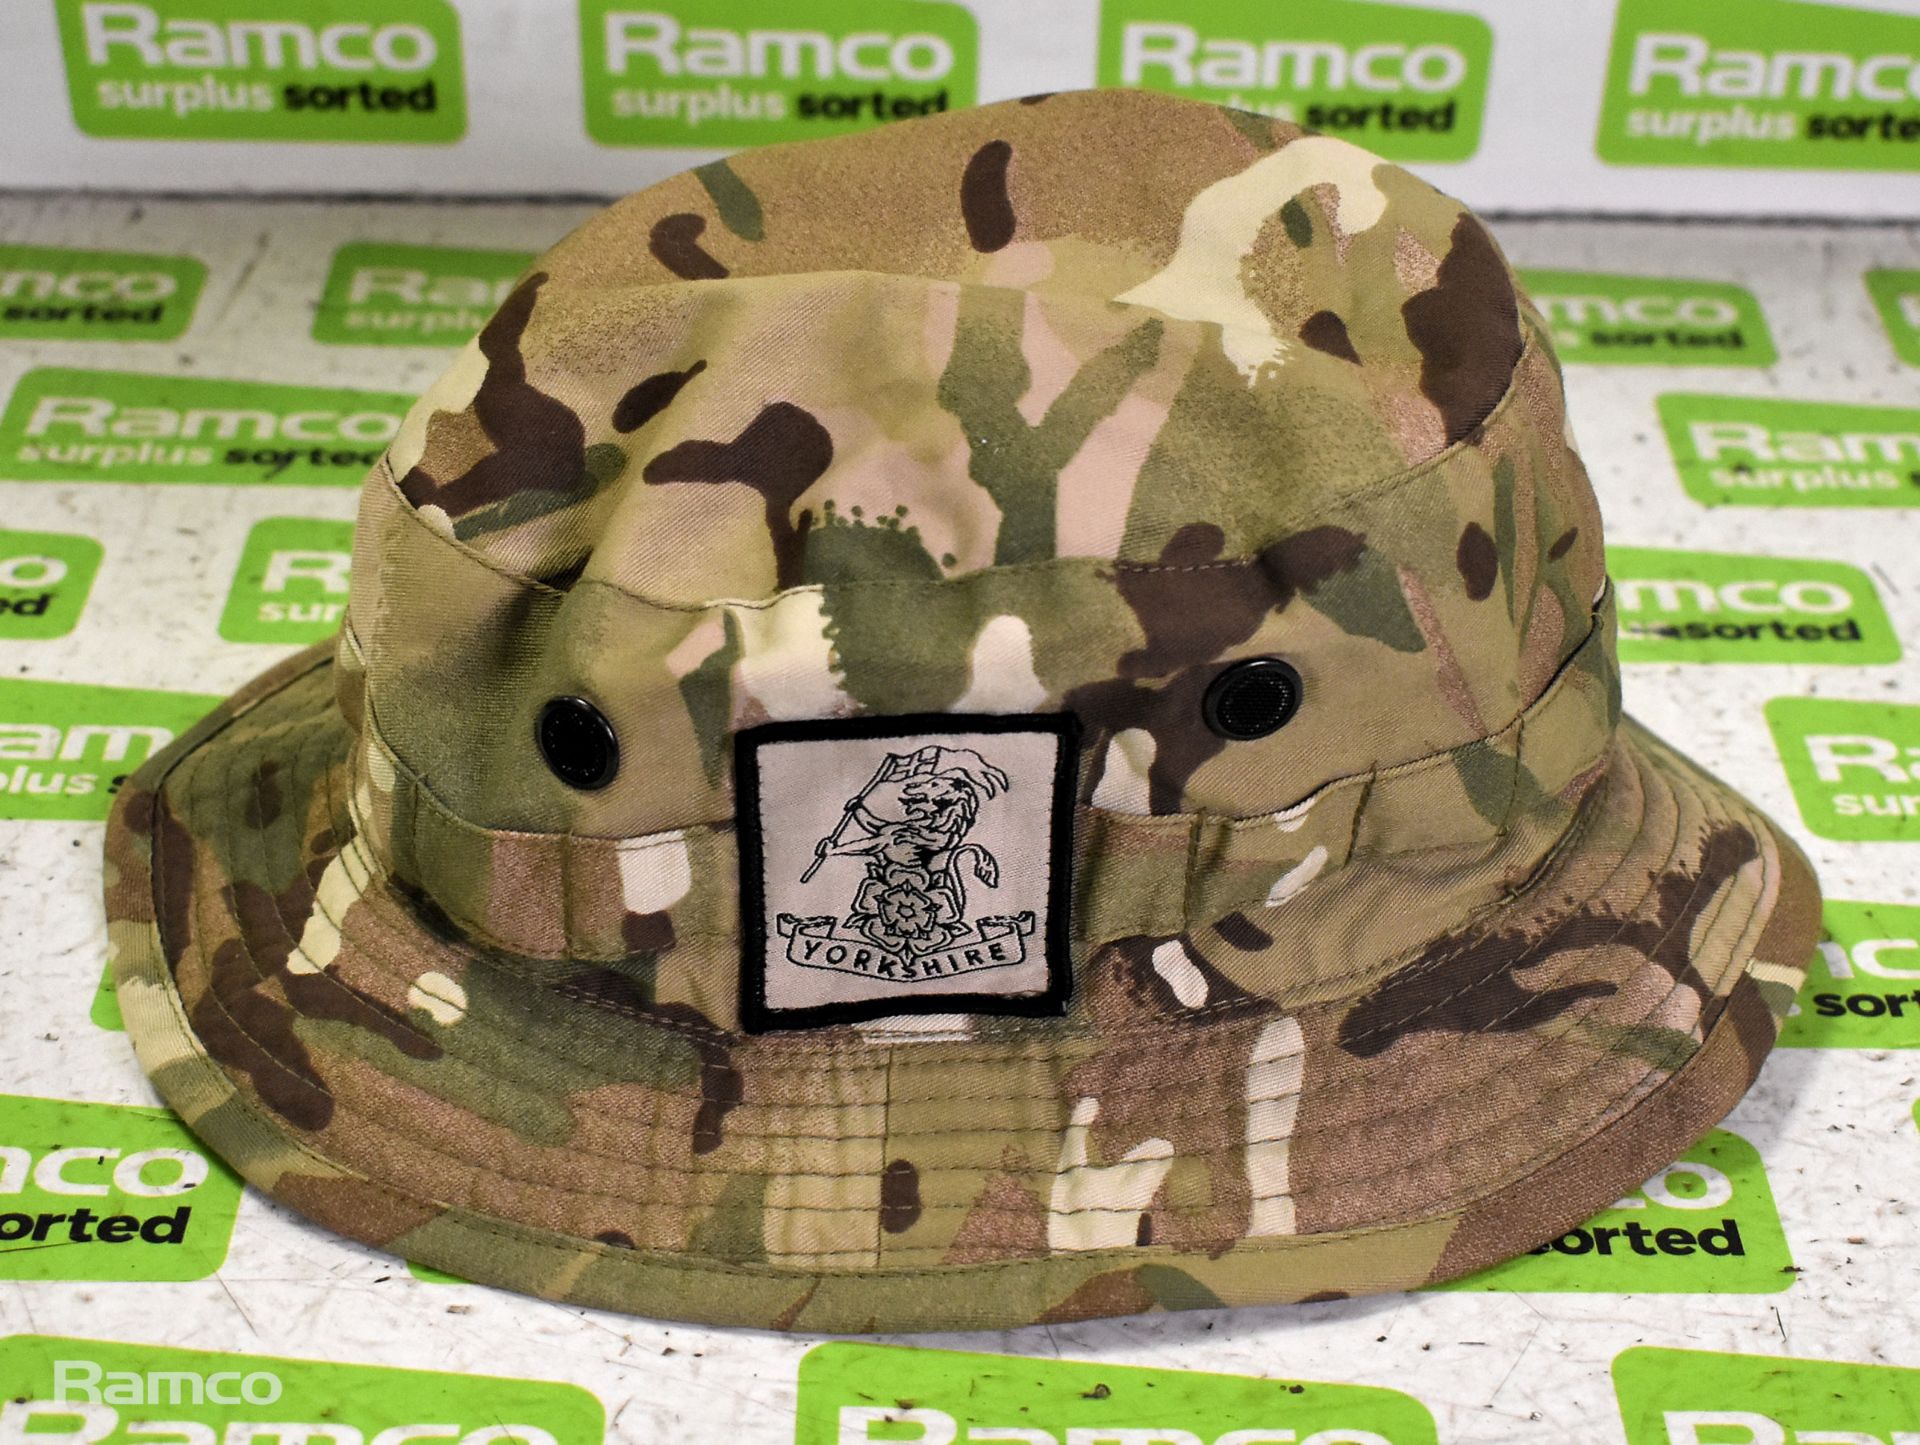 British Army cold weather caps, combat hats, 3L hydration packs - see description for details - Image 5 of 13